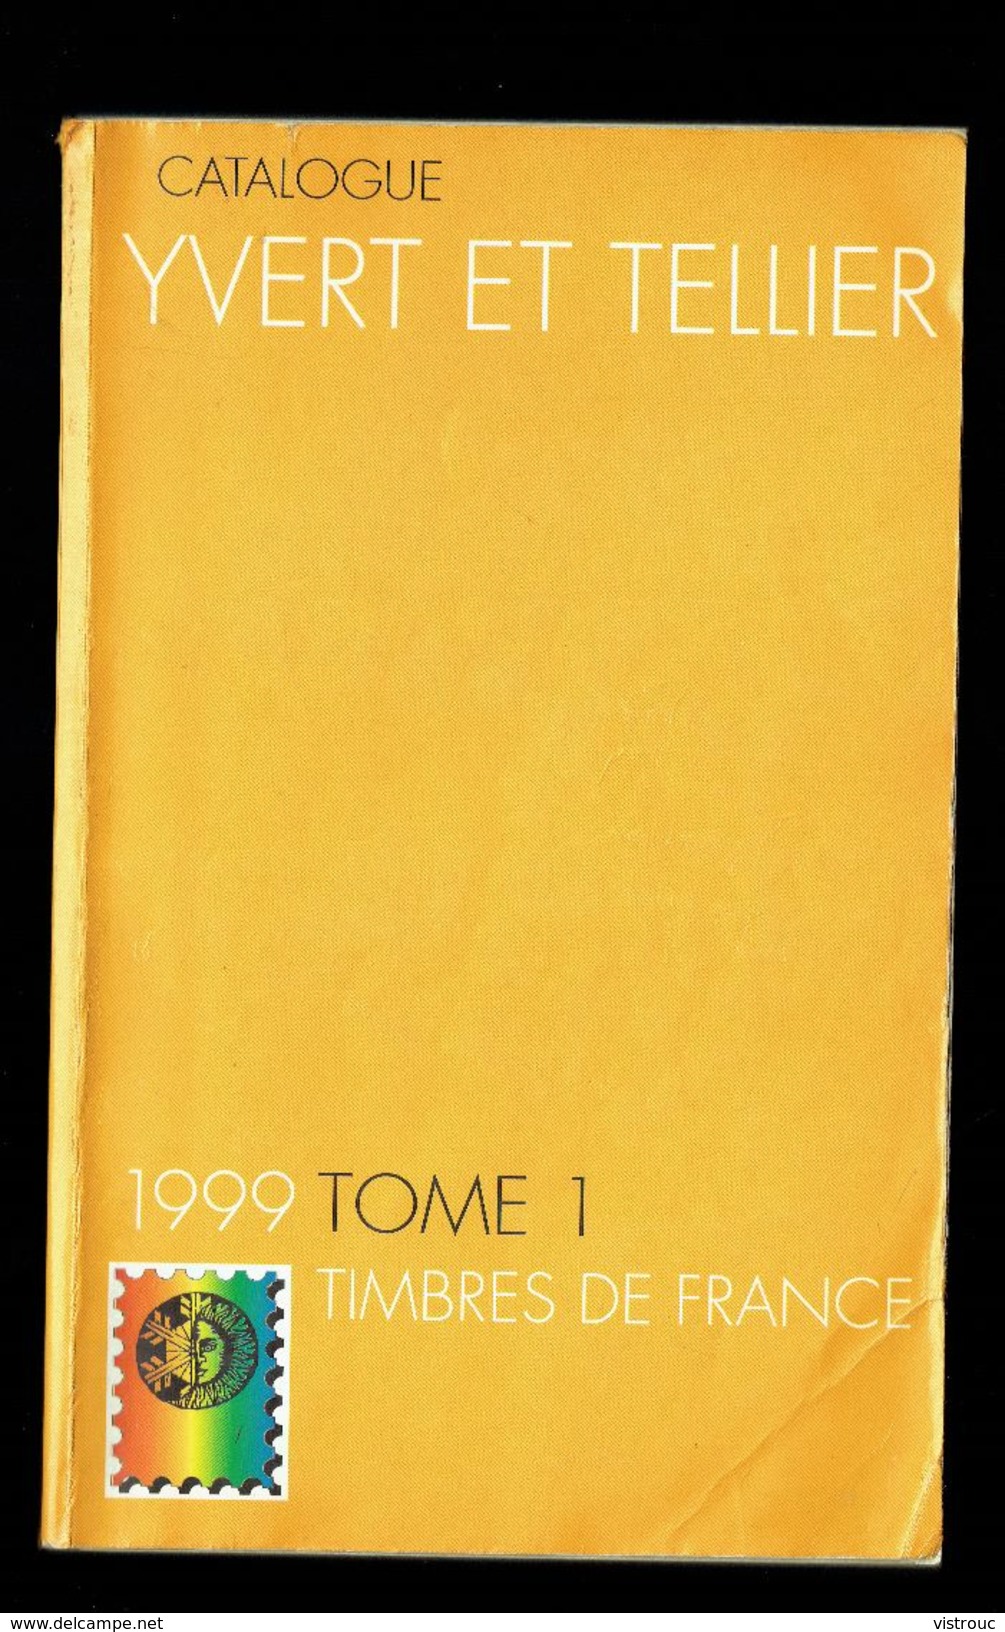 Catalogue Y. & T. - Edition 1999, Tome 1 - FRANCE. - Francia